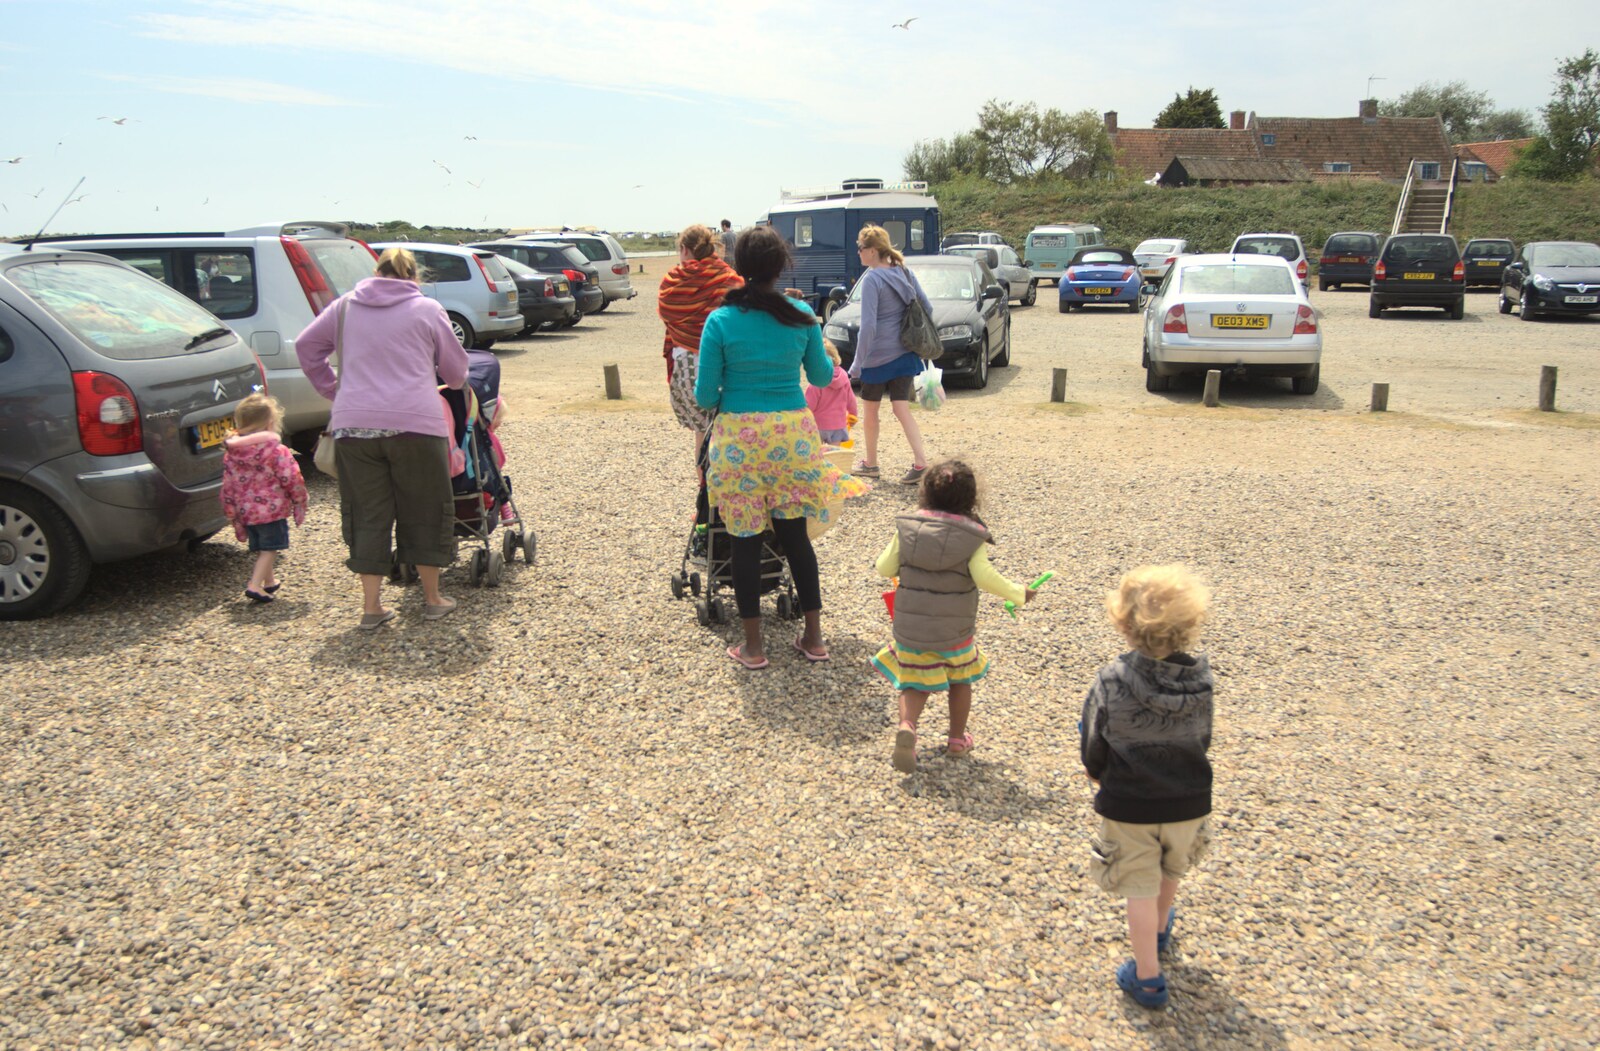 We head off to the beach from Carlton Park Camping, Saxmundham, Suffolk - 4th June 2011